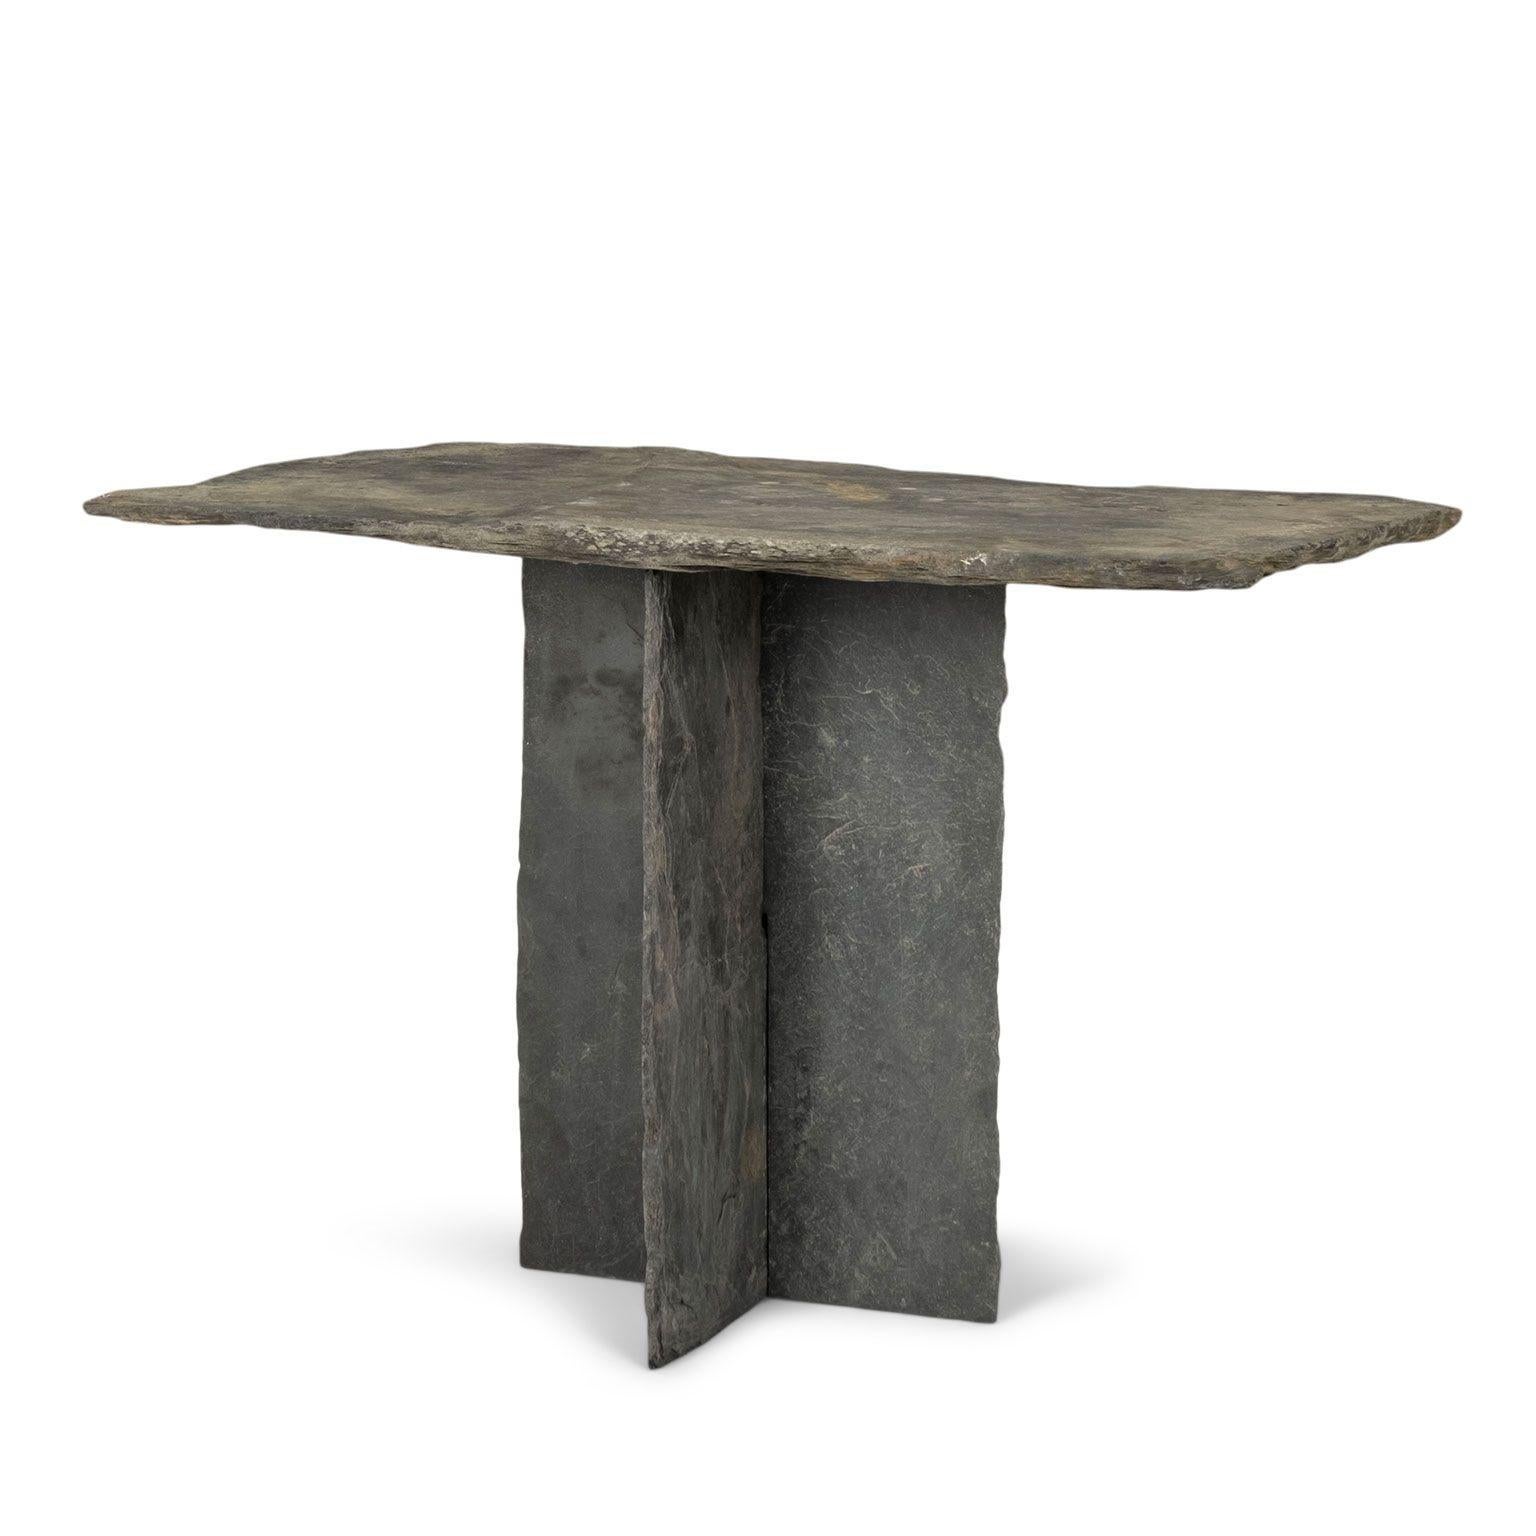 Vintage French rectangular top slate table, raised upon two-piece straight-edge slate base. Another similar table in slightly different dimensions is available. Tables sold individually, priced $9,600 each.
Patina from outdoor use for decades can be